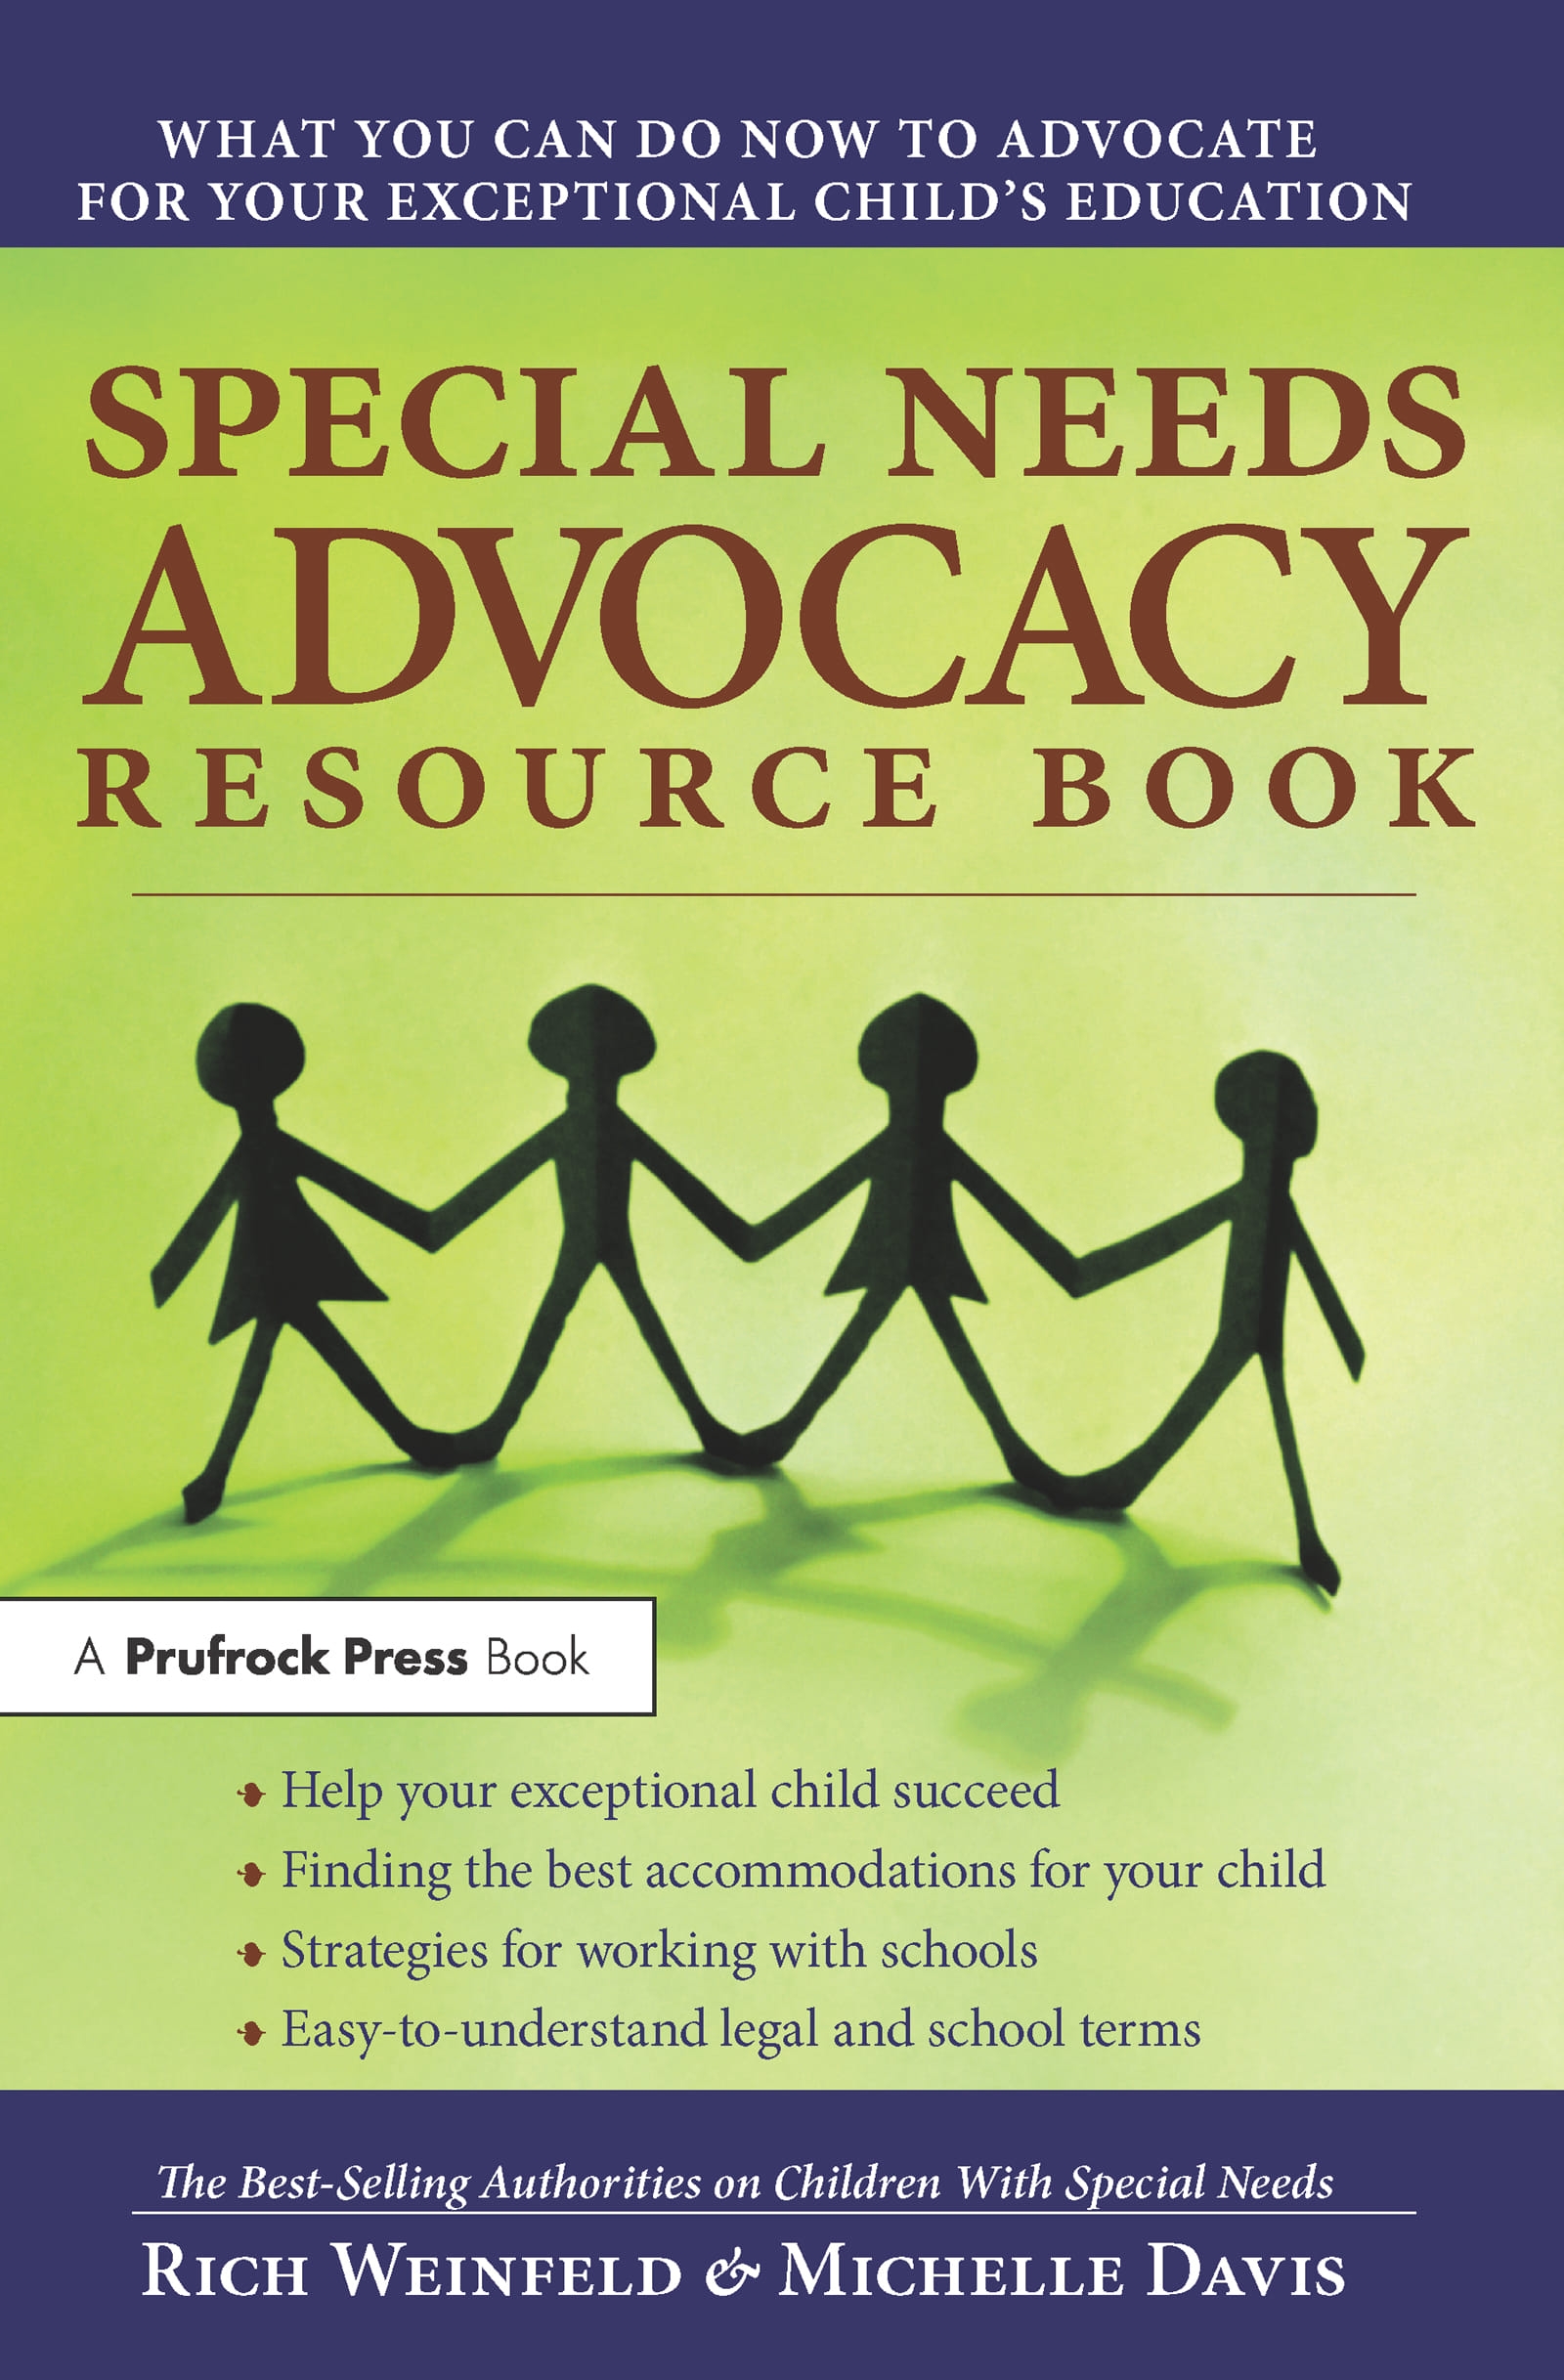 Special Needs Advocacy Resource Book: What You Can Do Now to Advocate for Your Exceptional Child’s Education